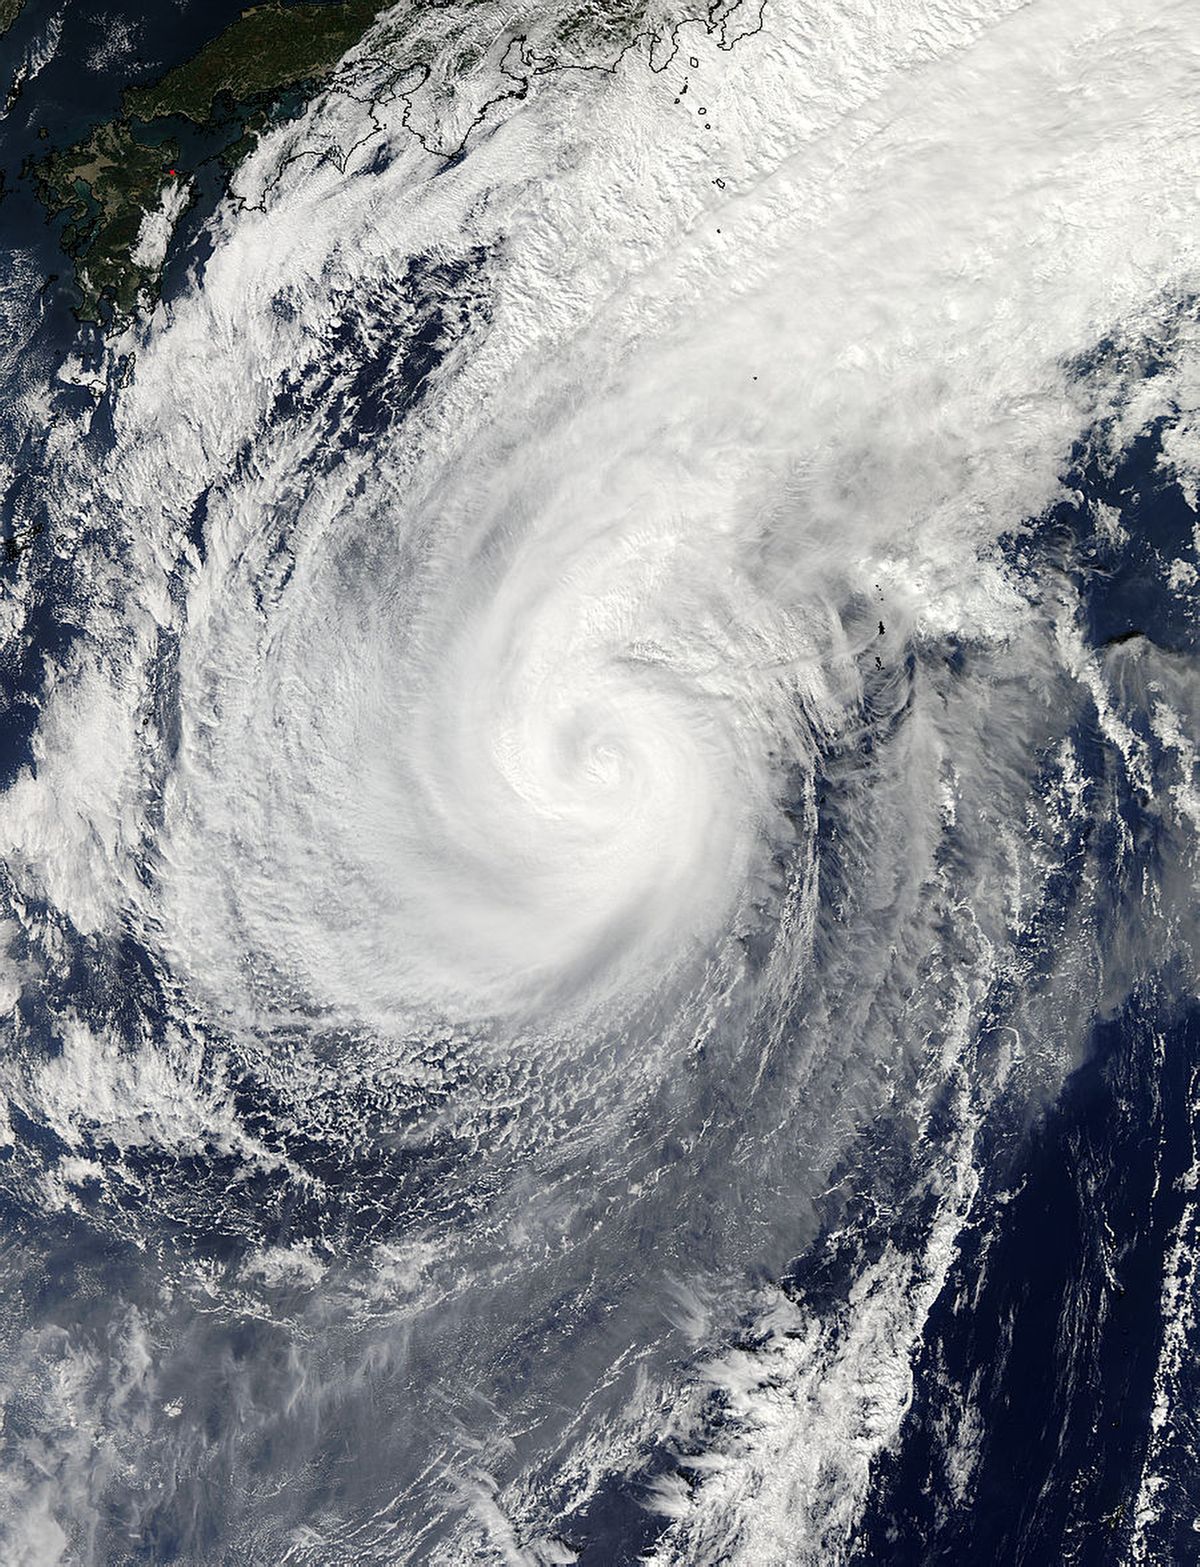 This Nov. 5, 2014 photo provided by NASA shows a picture captured by NASA's Aqua satellite of Typhoon Nuri. Weather forecasters say an explosive storm, a remnant of Typhoon Nuri, surpassing the intensity of 2012's Superstorm Sandy is heading toward the northern Pacific Ocean and expected to pass Alaska's Aleutian Islands over the weekend.   (AP/NASA)